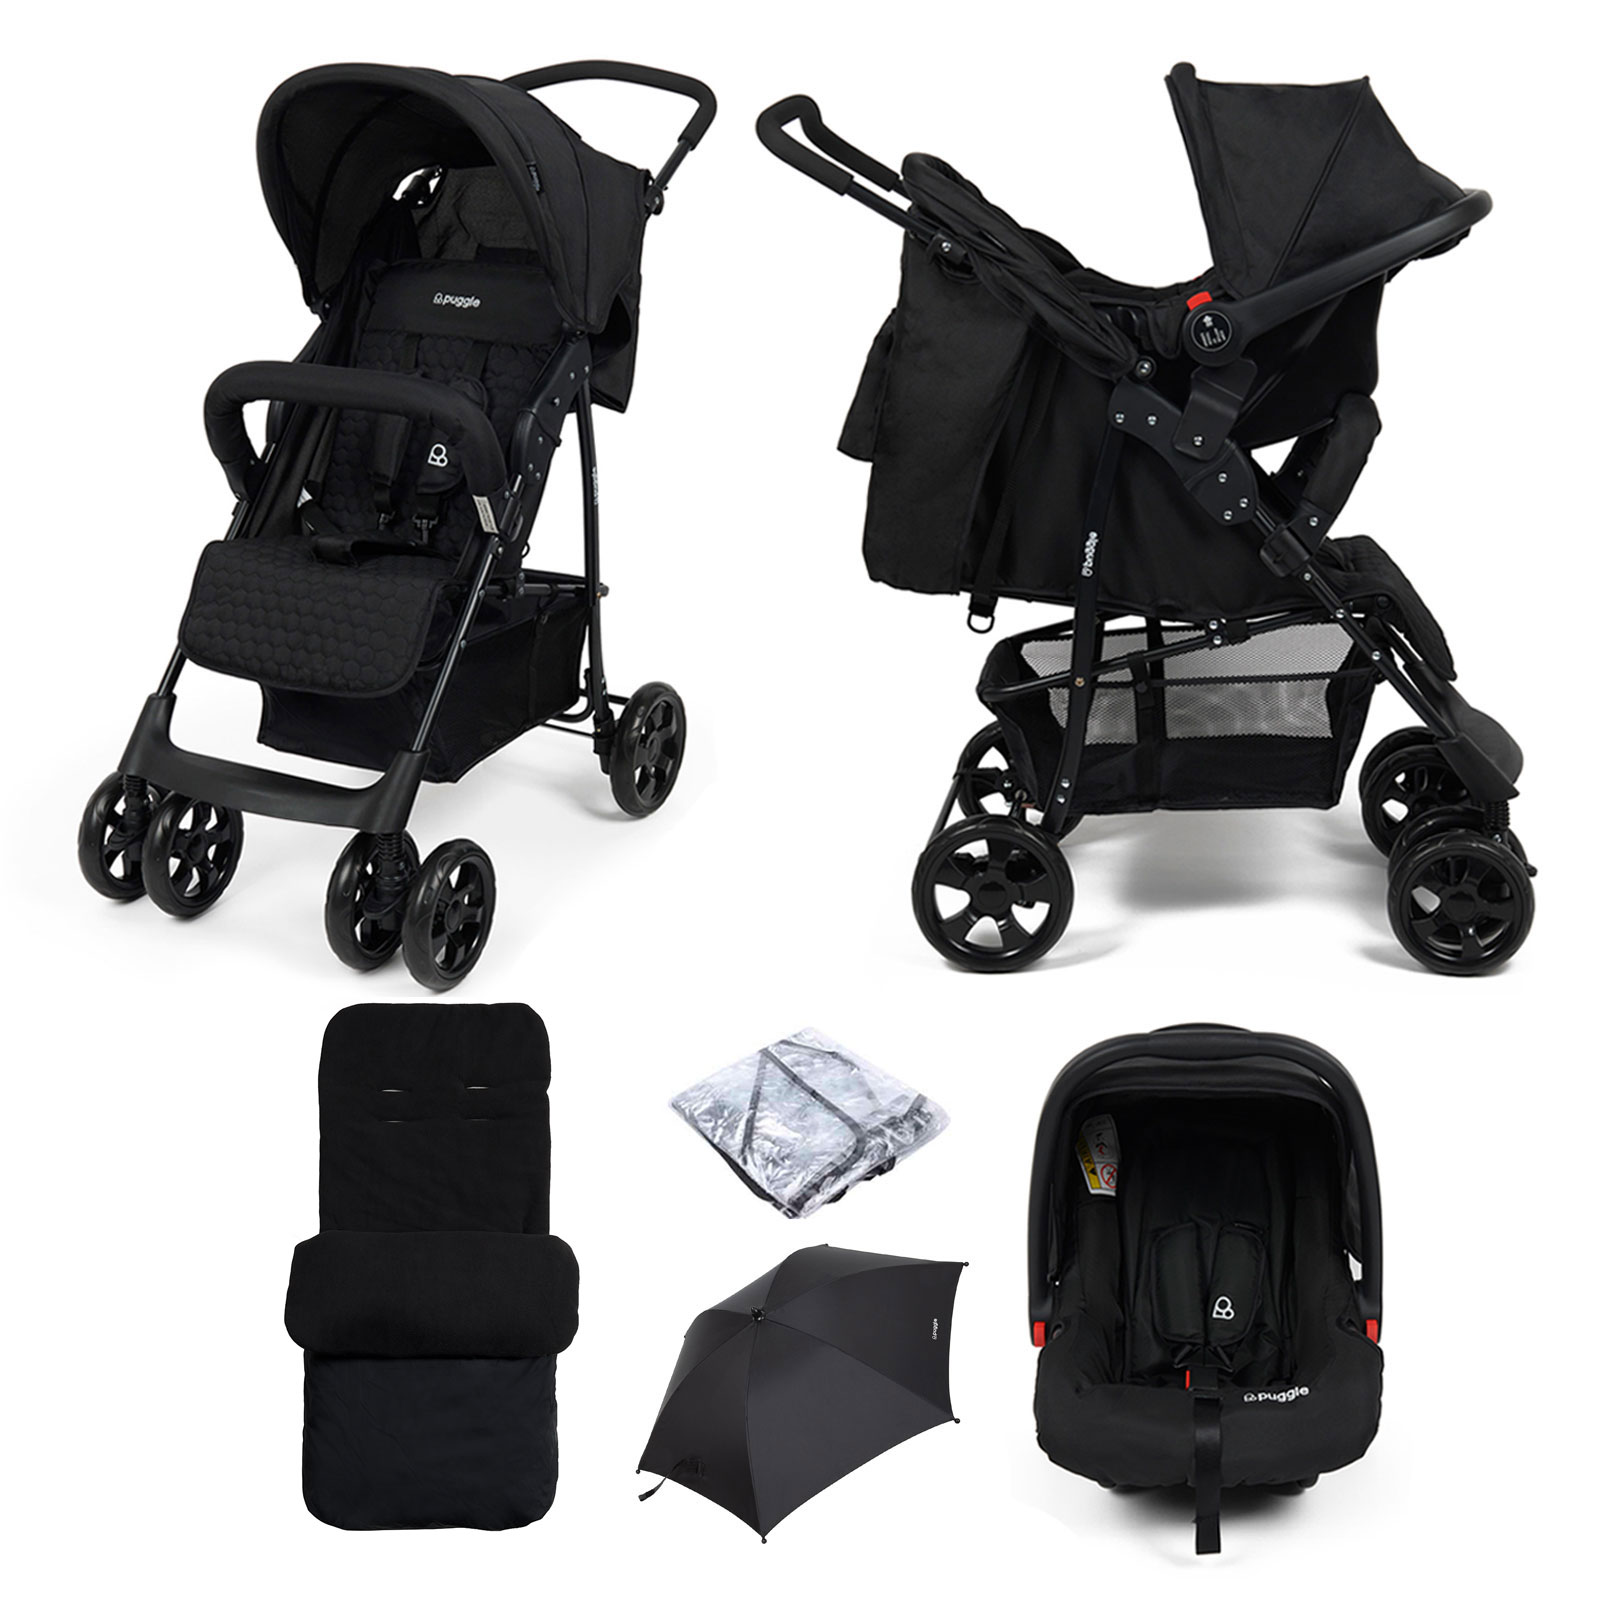 Puggle Lowton Luxe 2in1 Travel System with Raincover, Universal Deluxe Footmuff & Parasol – Storm Black